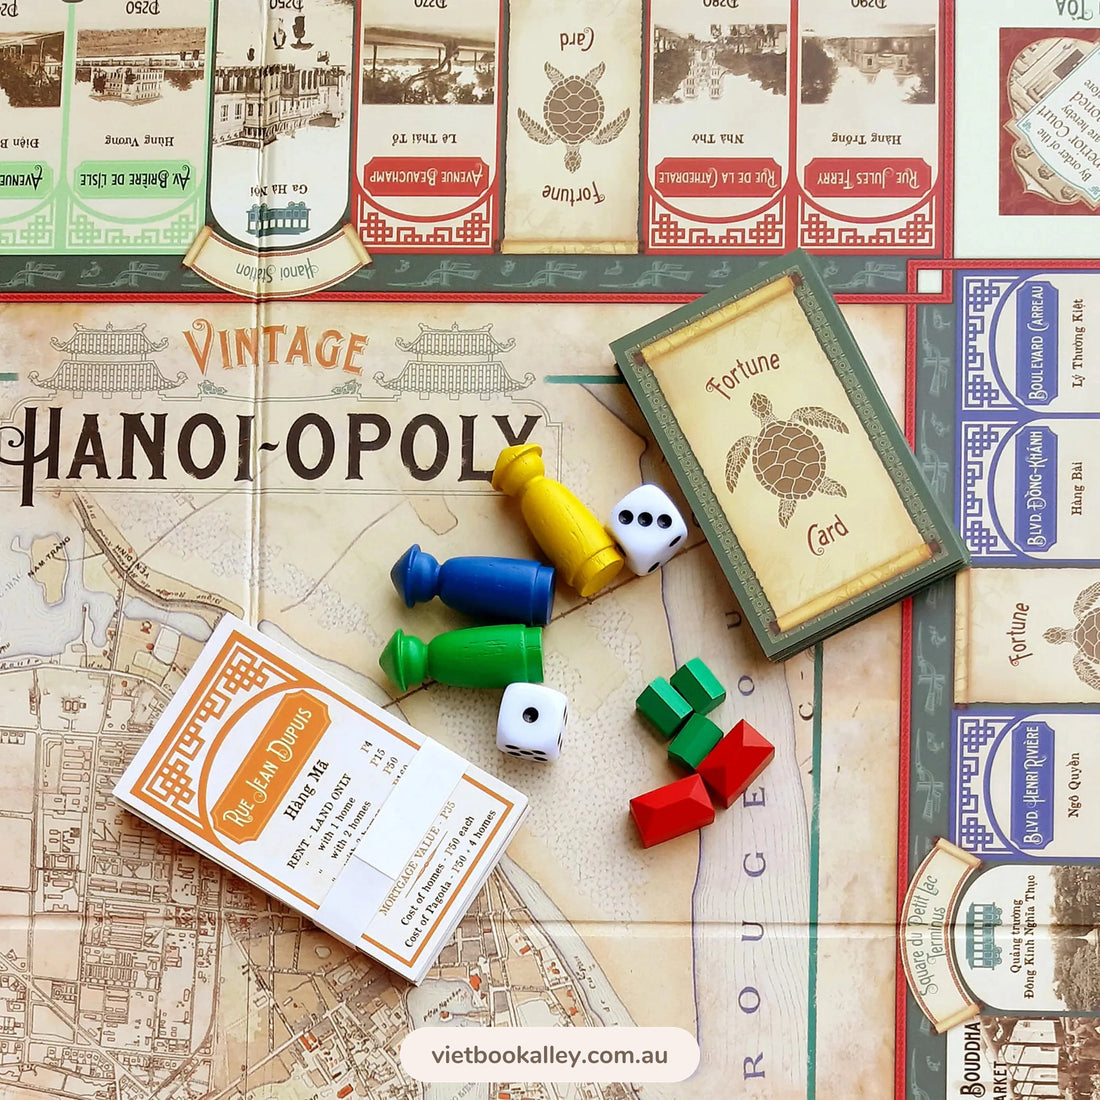 Vintage Hanoi Opoly (Board game)